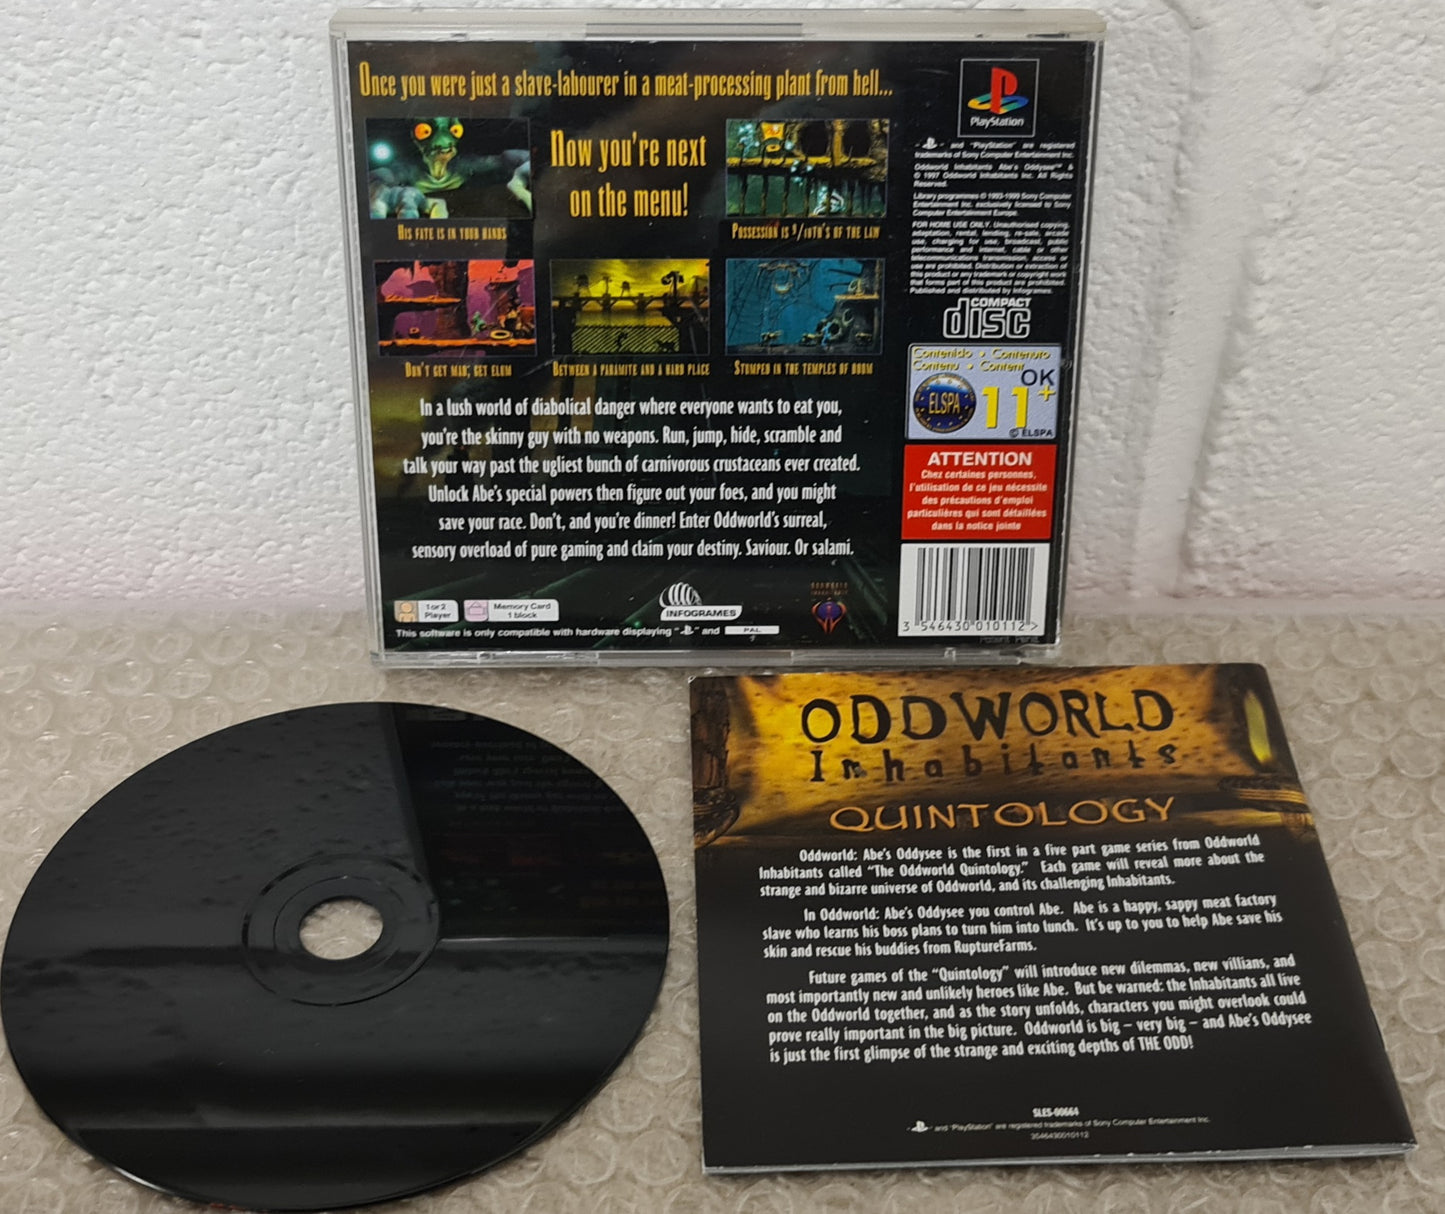 Oddworld Abe's Oddysee Best of Infograms Sony Playstation 1 (PS1) Game